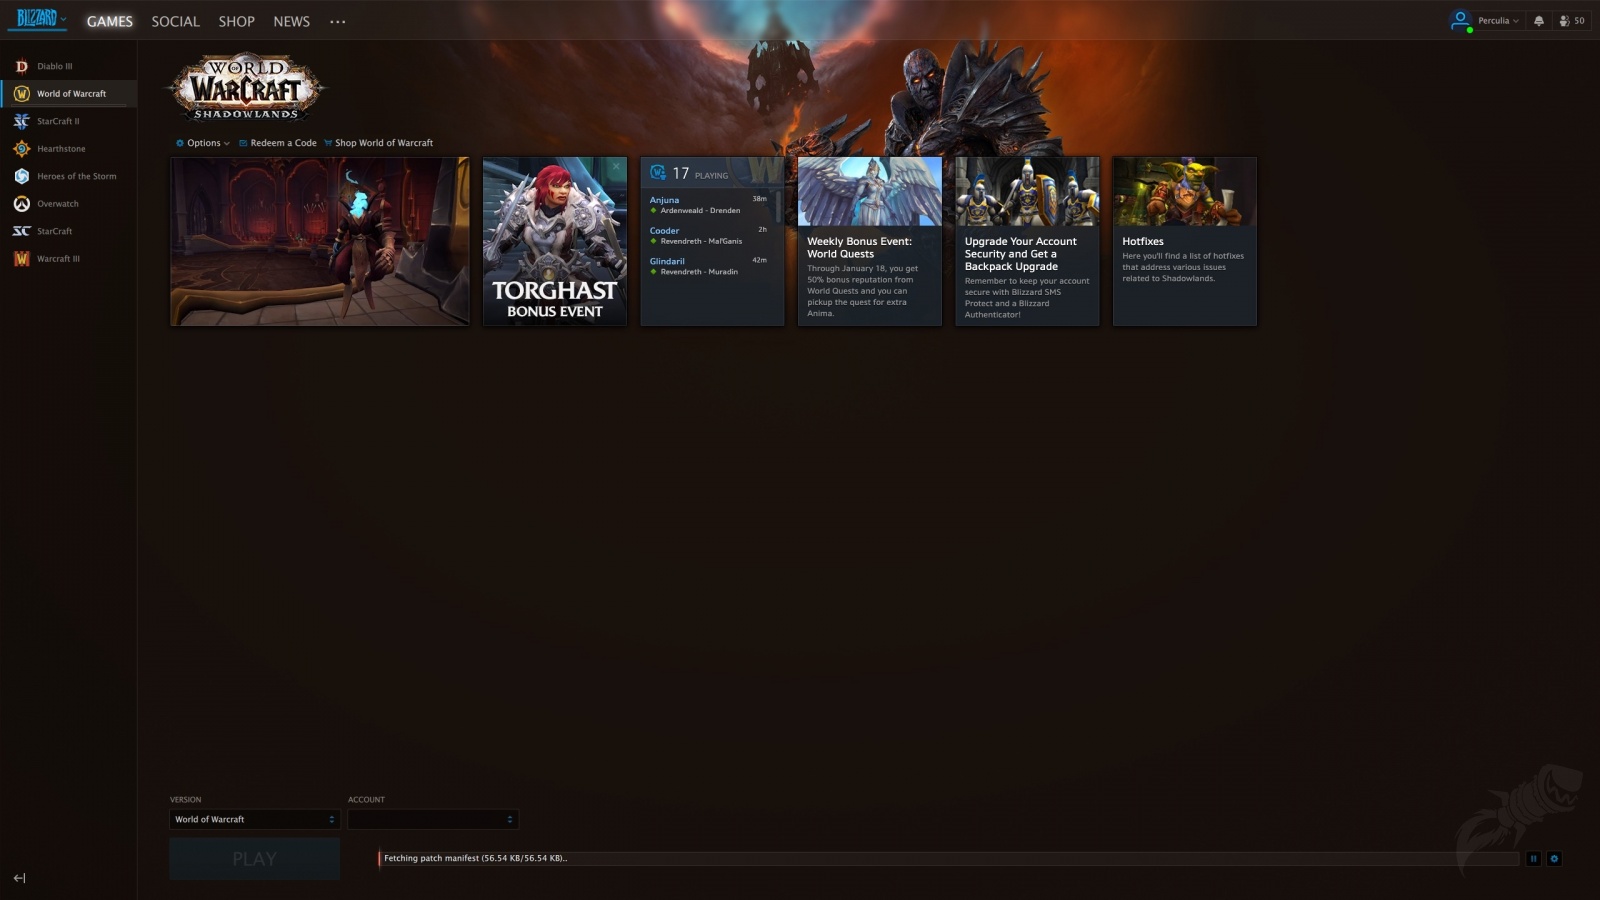 Battle.net Launcher 2.0 Makeover Going Live in North America - Wowhead News